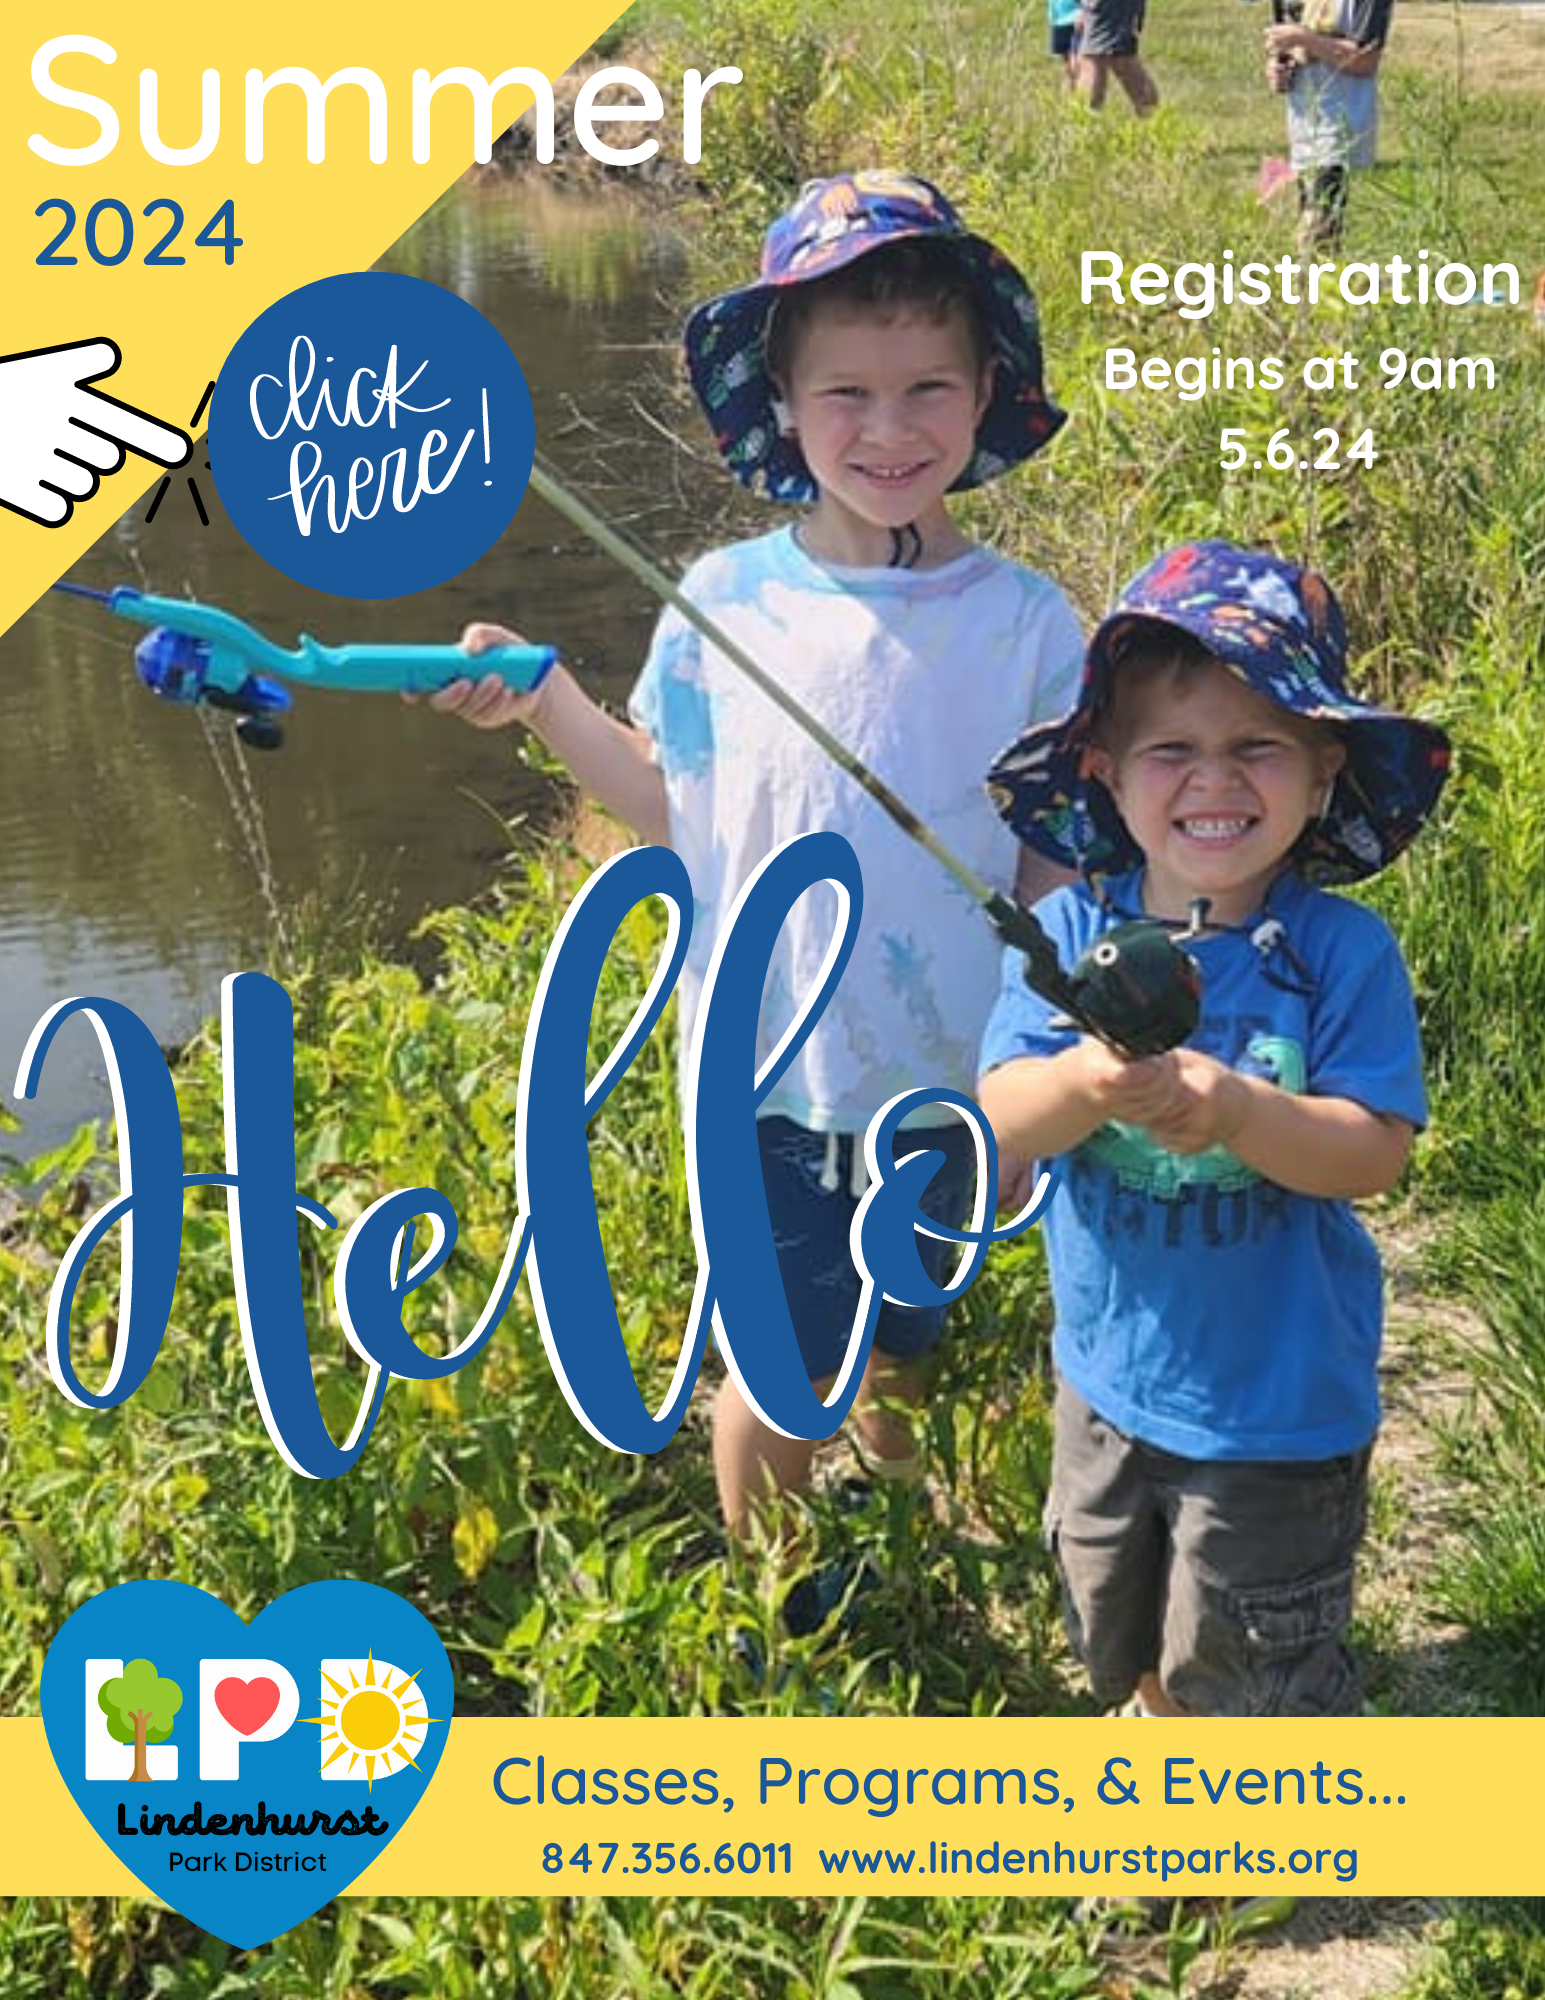 Advertisement for Summer 2024 classes, programs & events featuring two young children, smiling and holding fishing rods. Registration begins at 9AM 5/6/24. 